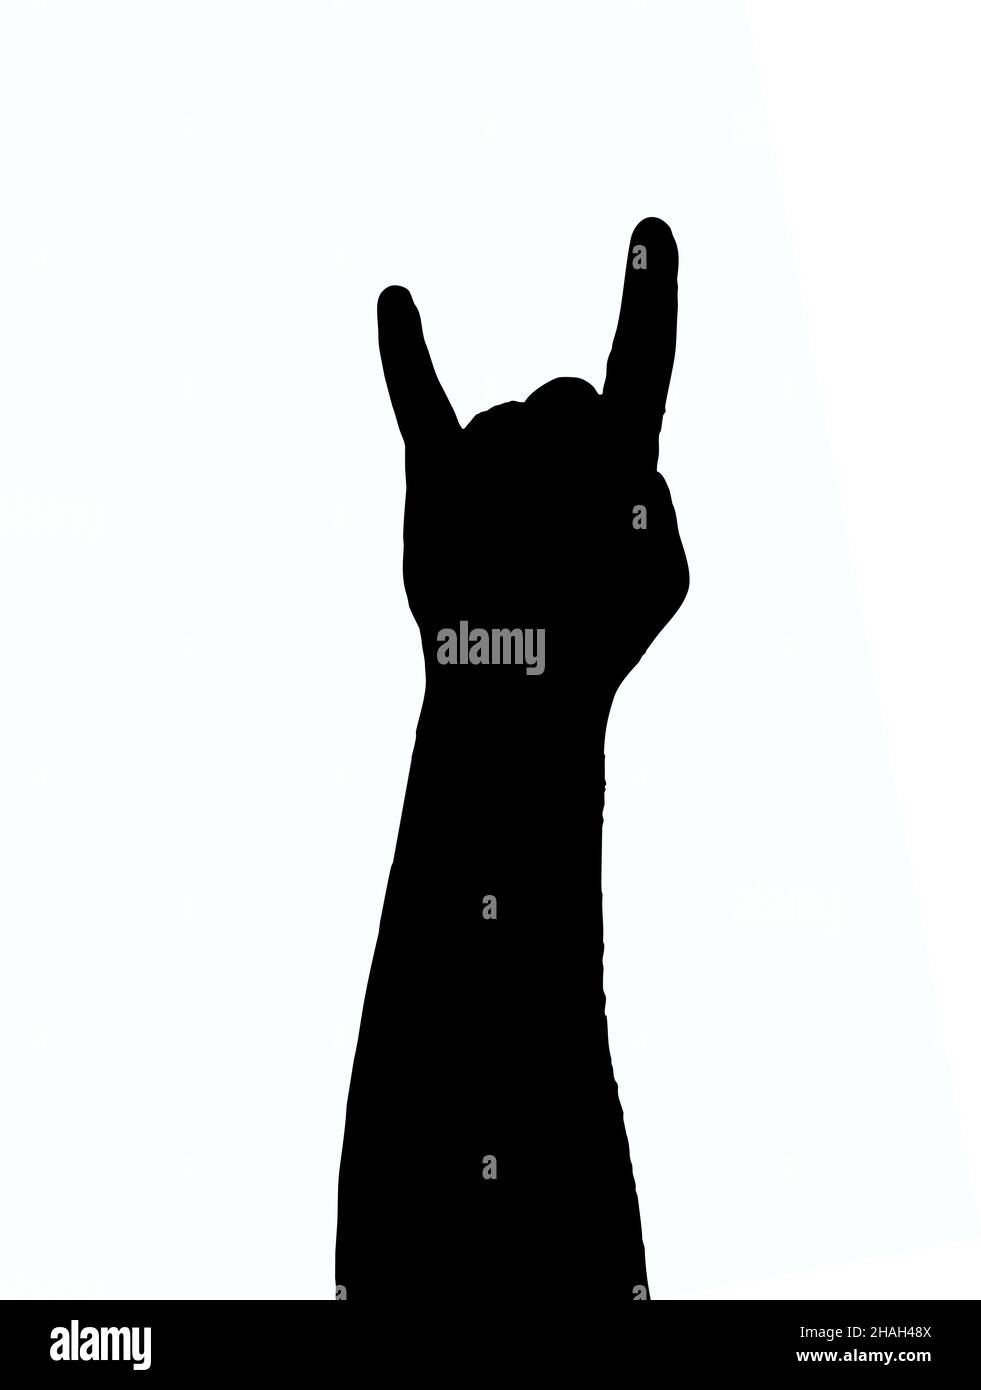 Illustration of a human palm folded in a goat rocker gesture on a white clipping background. To be shown at heavy metal concerts Stock Photo